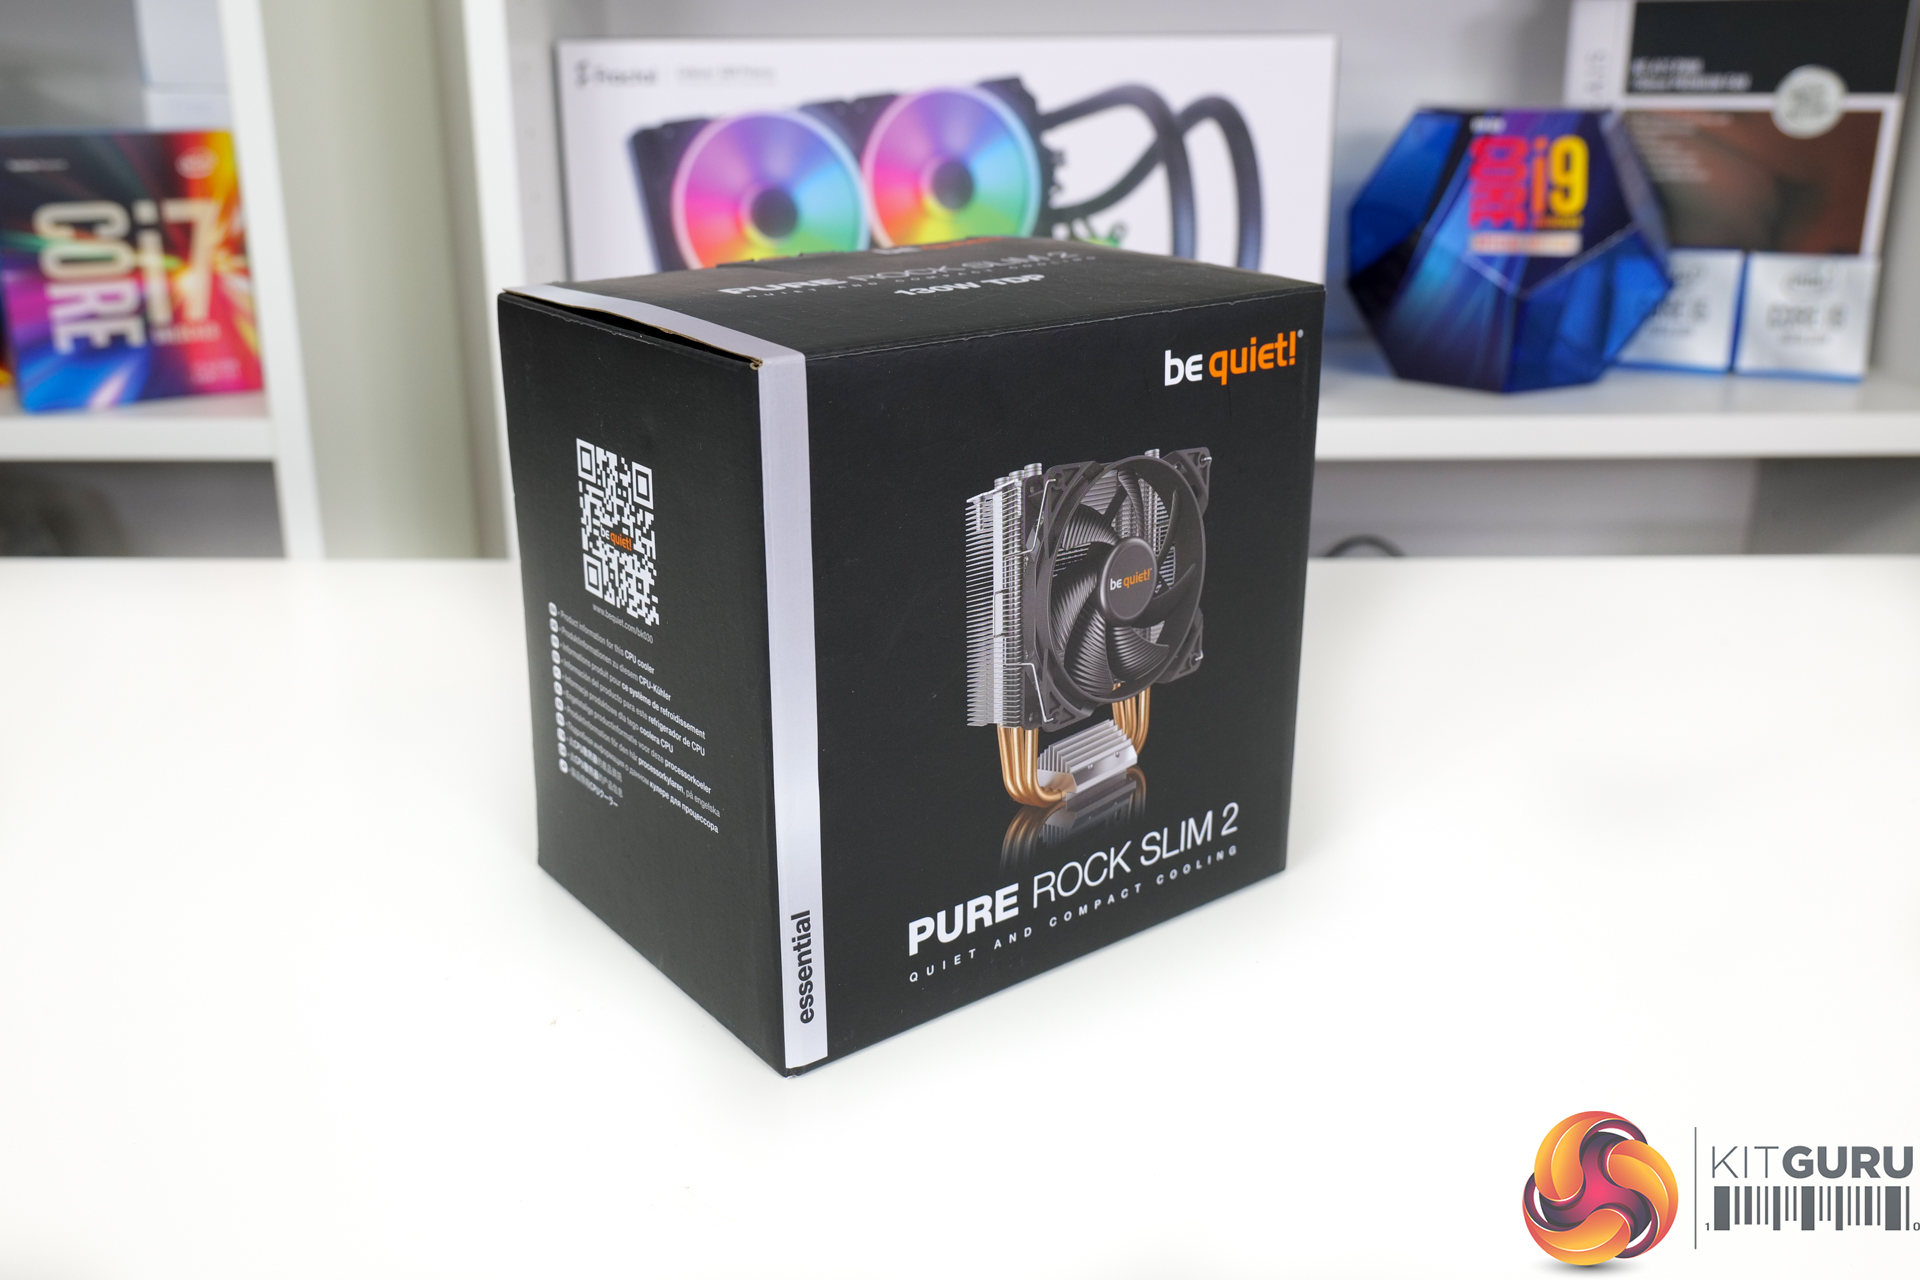 Is the bequiet pure rock slim 2 ok for 26 euro or i need dark rock for  5600x : r/pcmasterrace